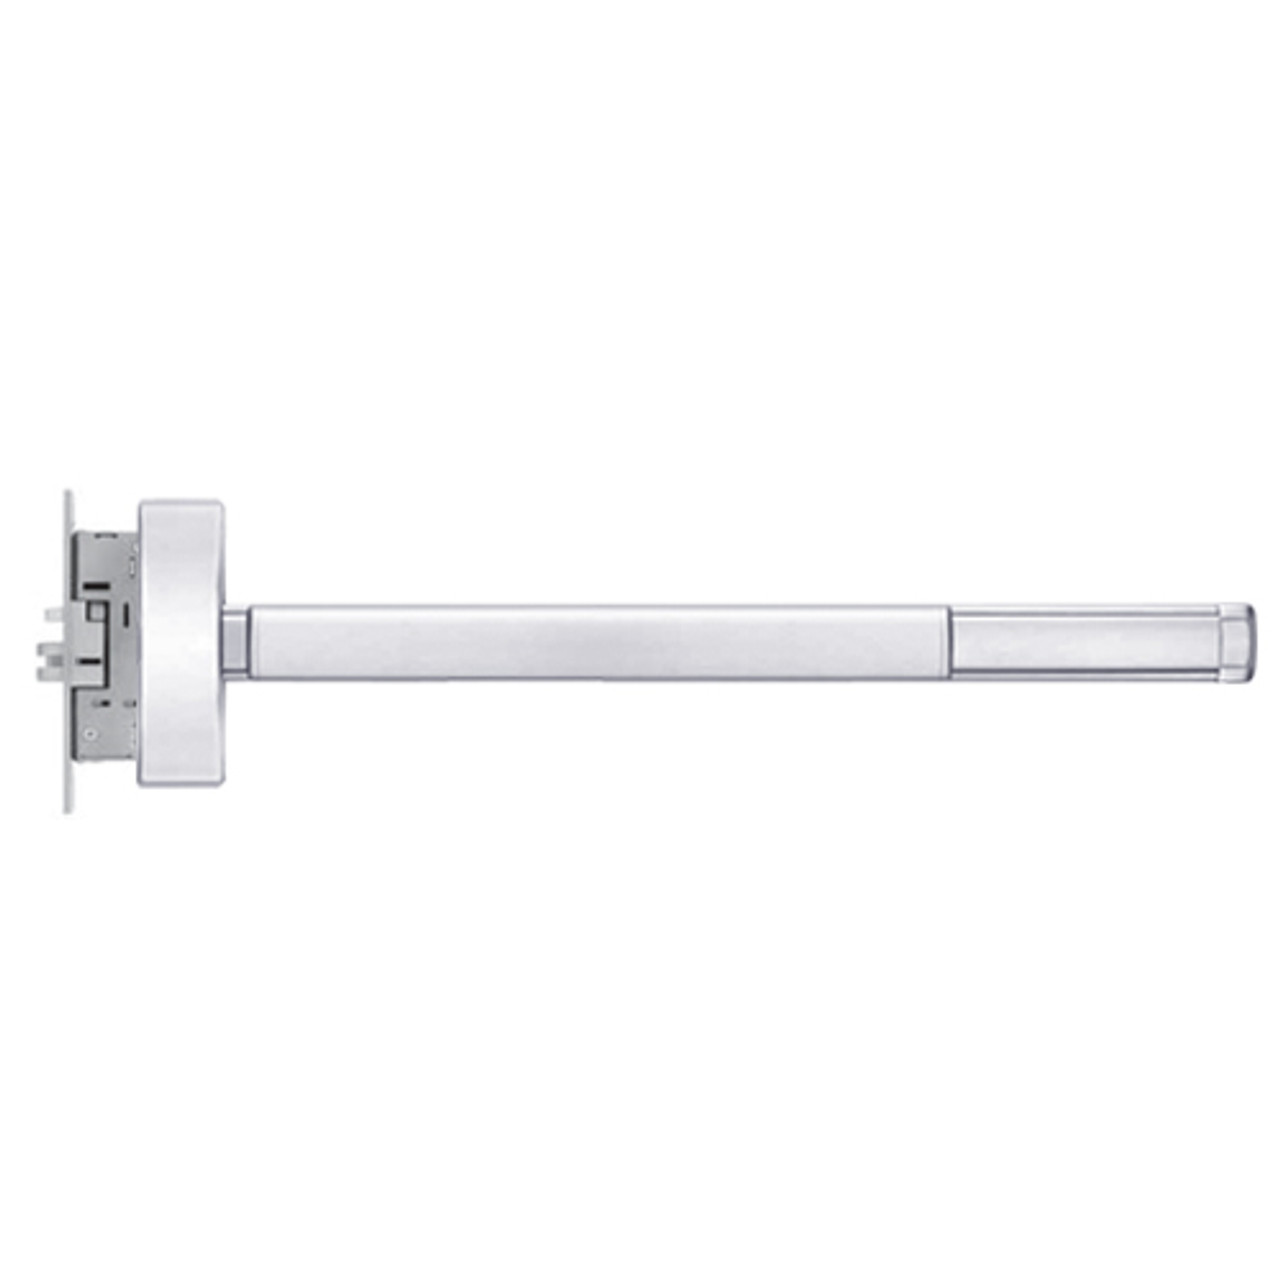 MLRFL2315-RHR-625-48 PHI 2300 Series Fire Rated Apex Mortise Exit Device with Motorized Latch Retraction Prepped for Thumb Piece Always Active in Bright Chrome Finish